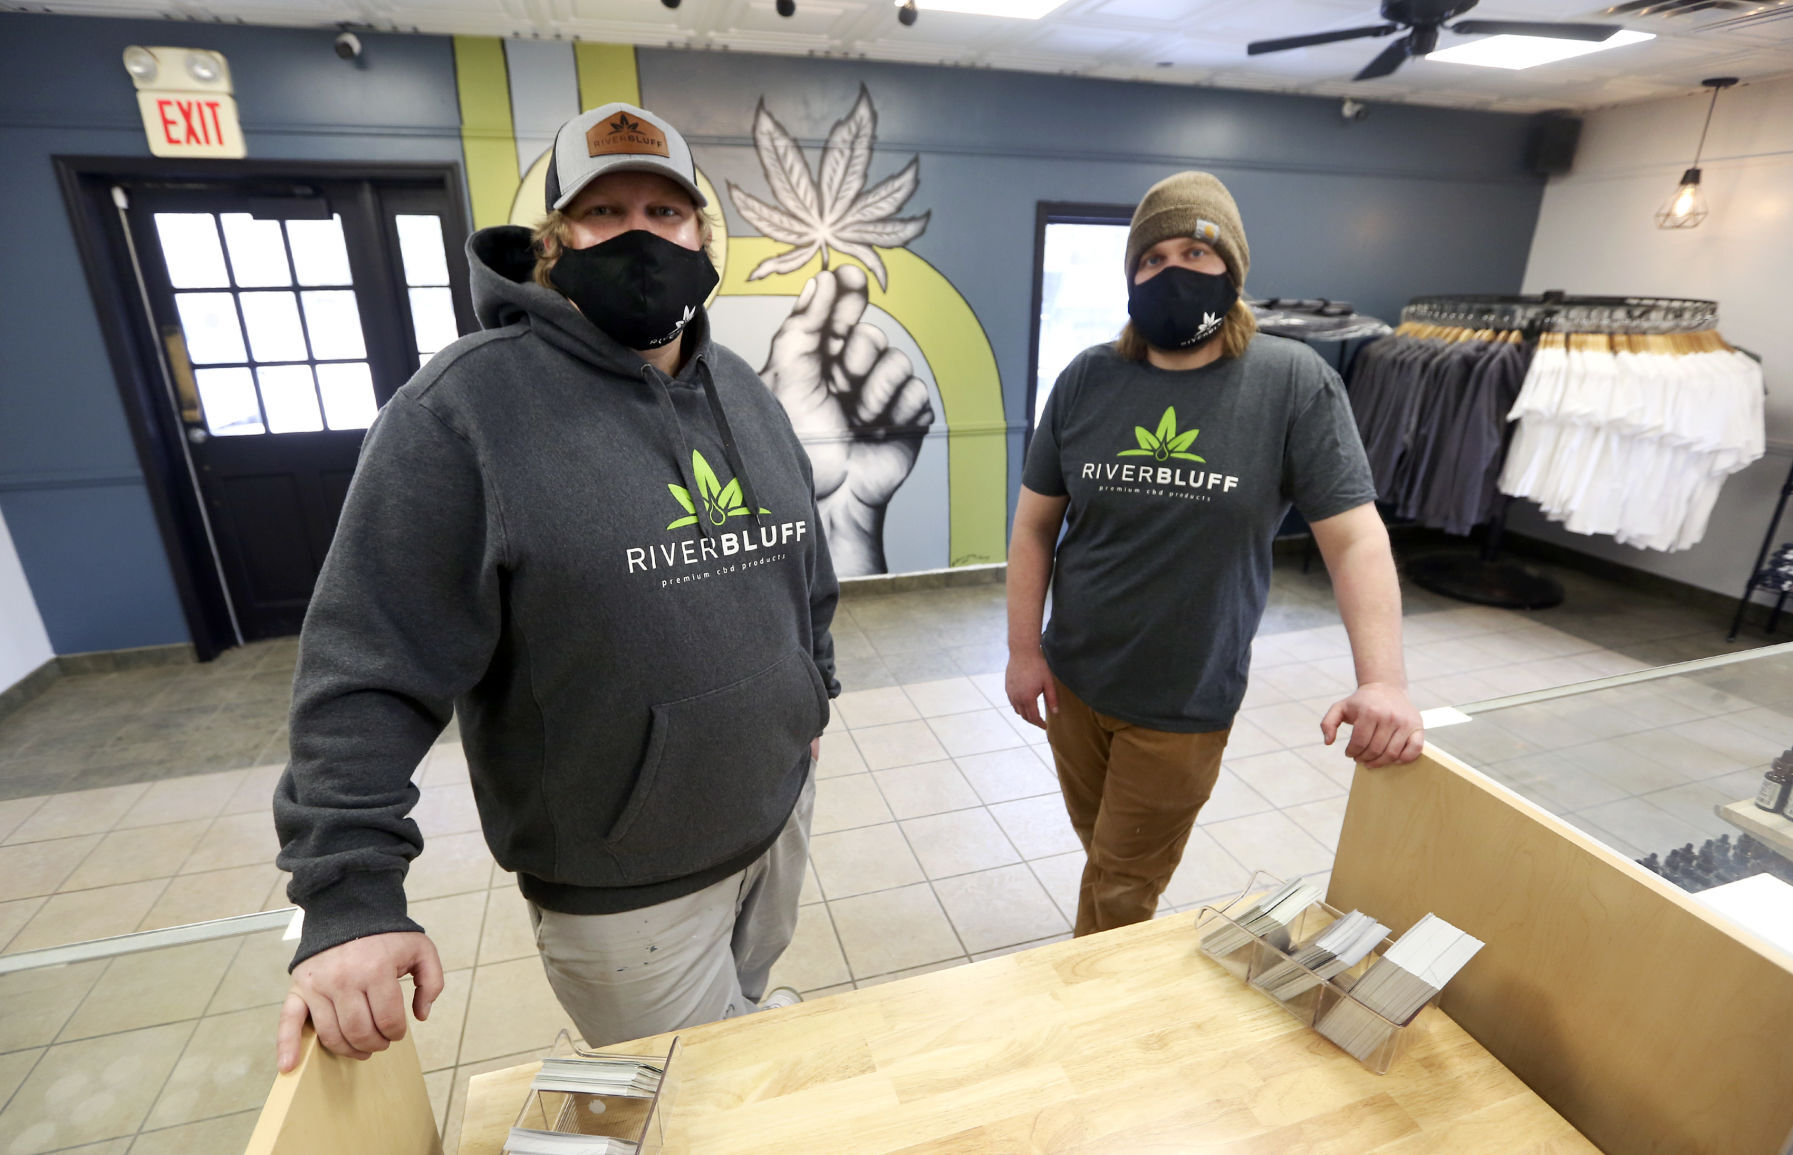 DJ Loeffelholz (left) and Joe Loeffelholz are co-owners of River Bluff Collective in East Dubuque, Ill., with their sister, Ali Gansemer (not pictured). Photo taken on Friday, March 5, 2021. PHOTO CREDIT: NICKI KOHL